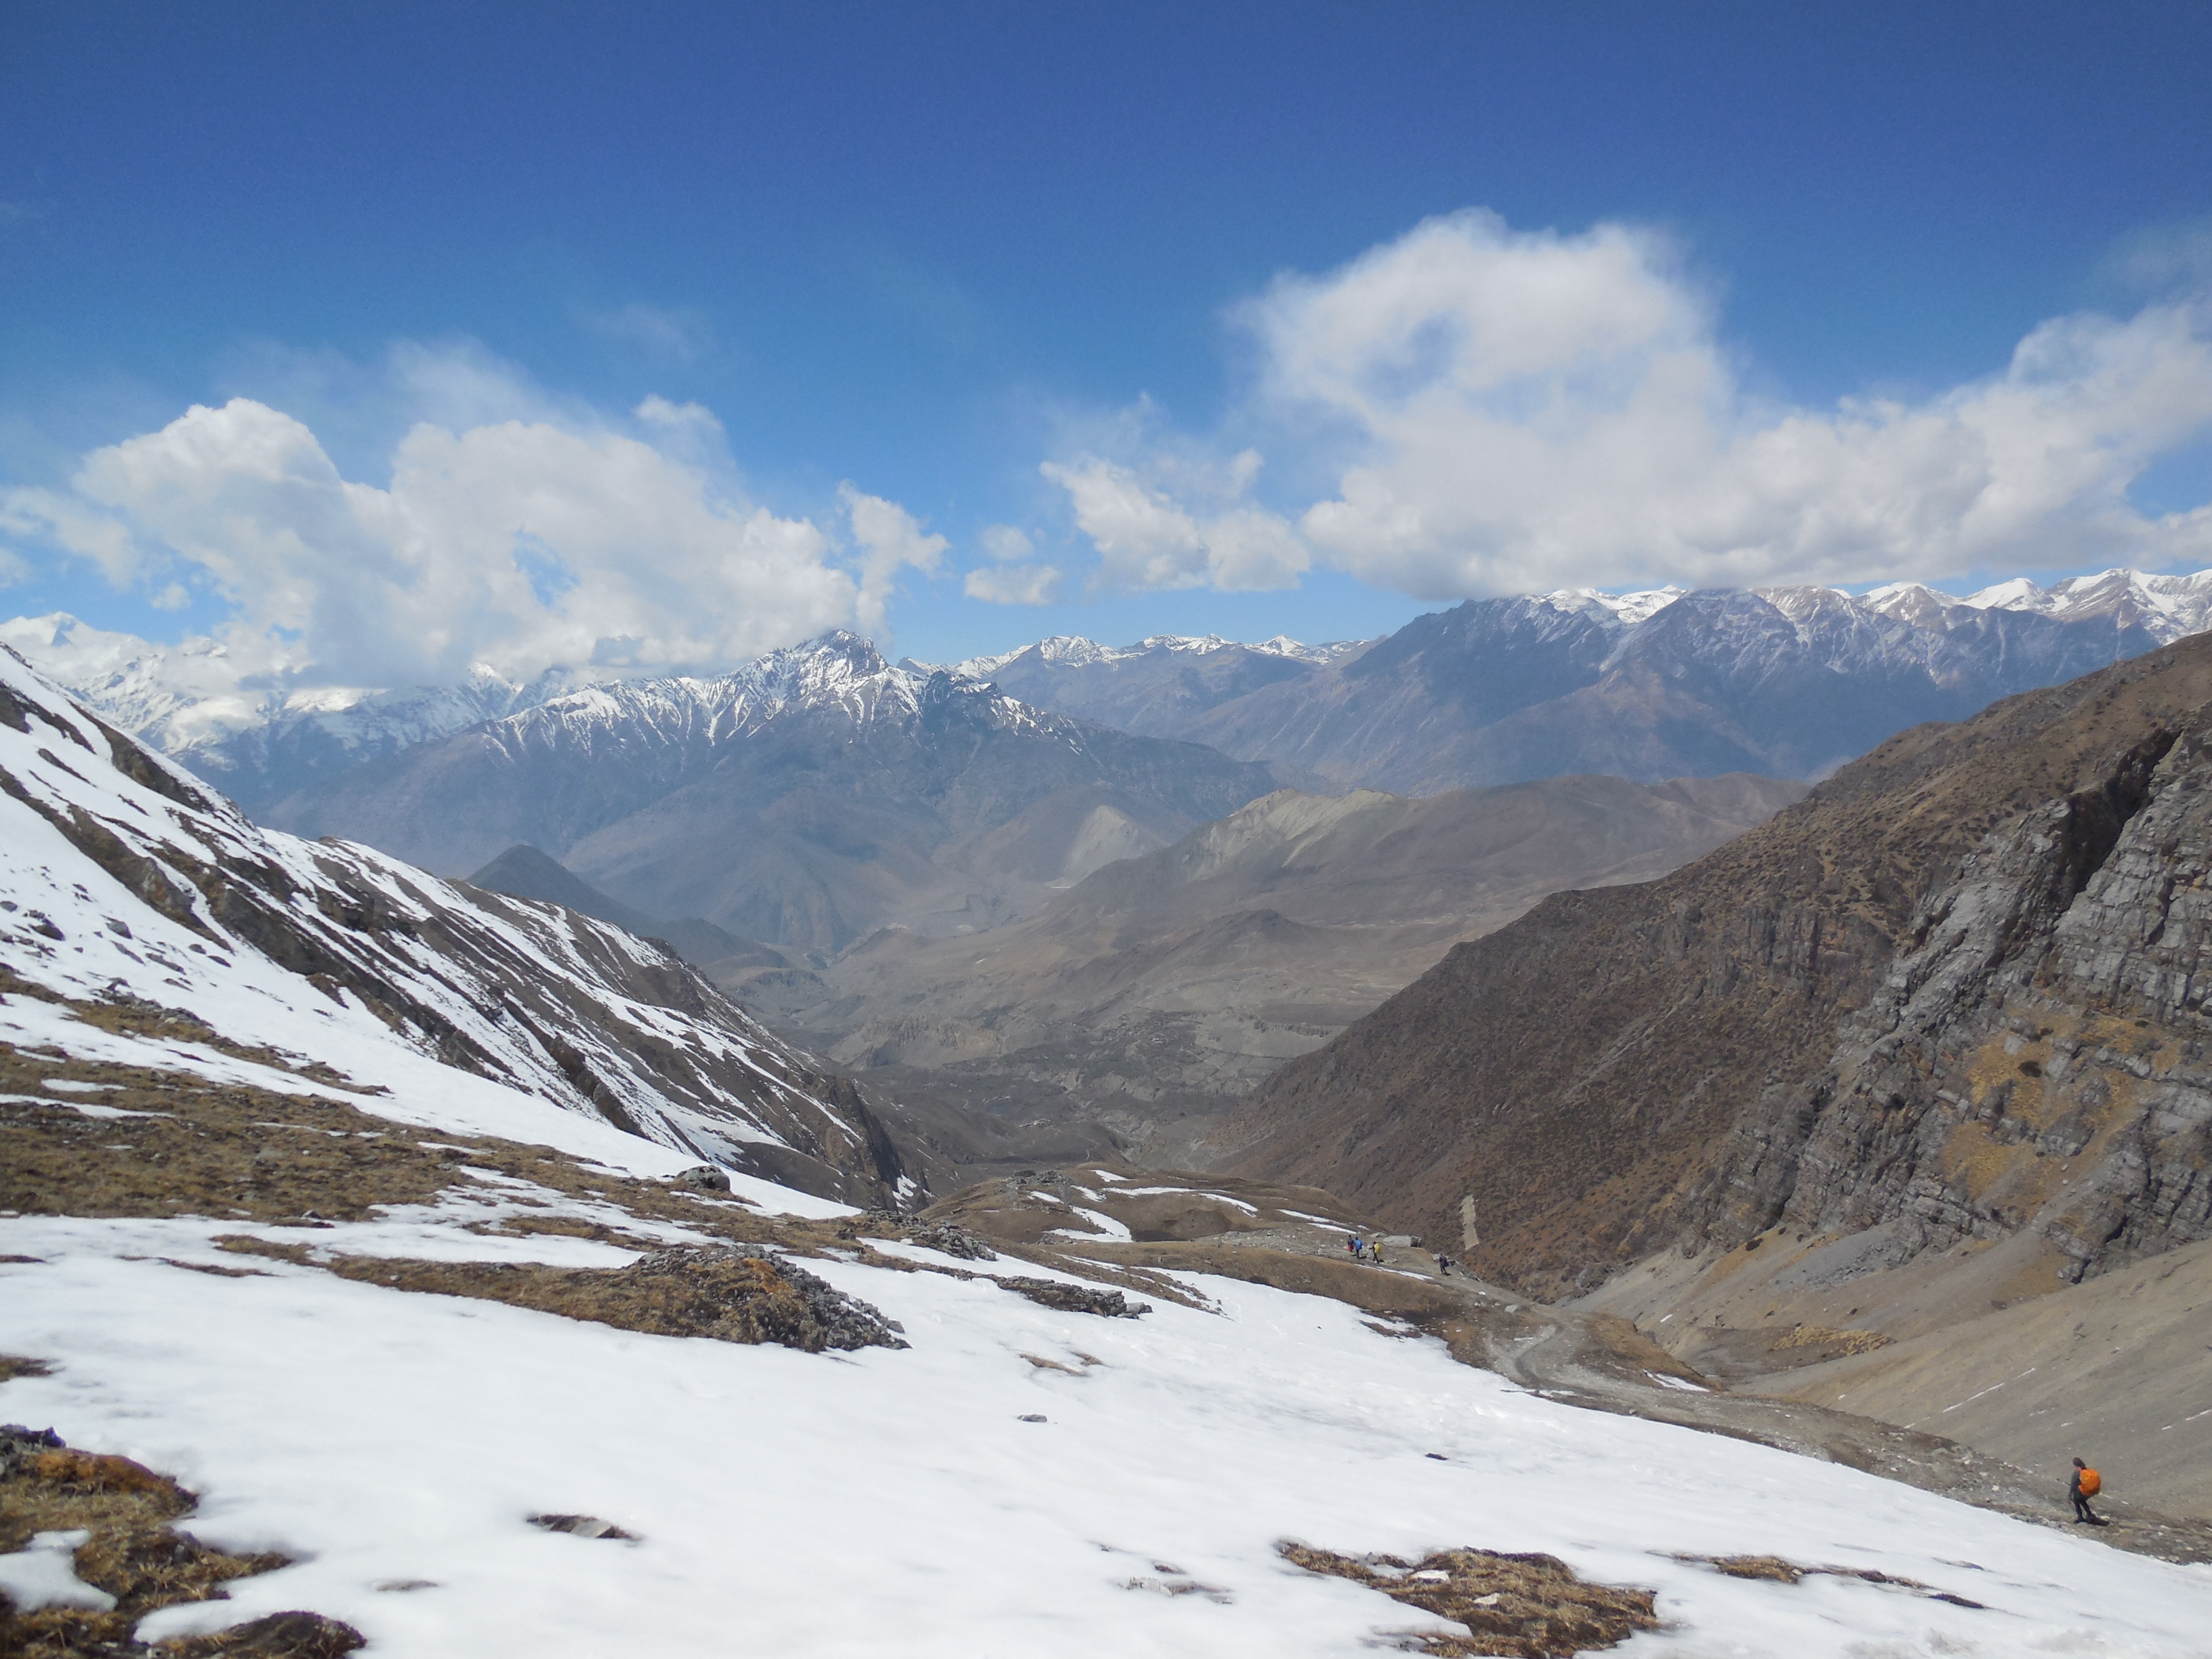 On the way down to Muktinath. Longing for a shower and some zivilisation